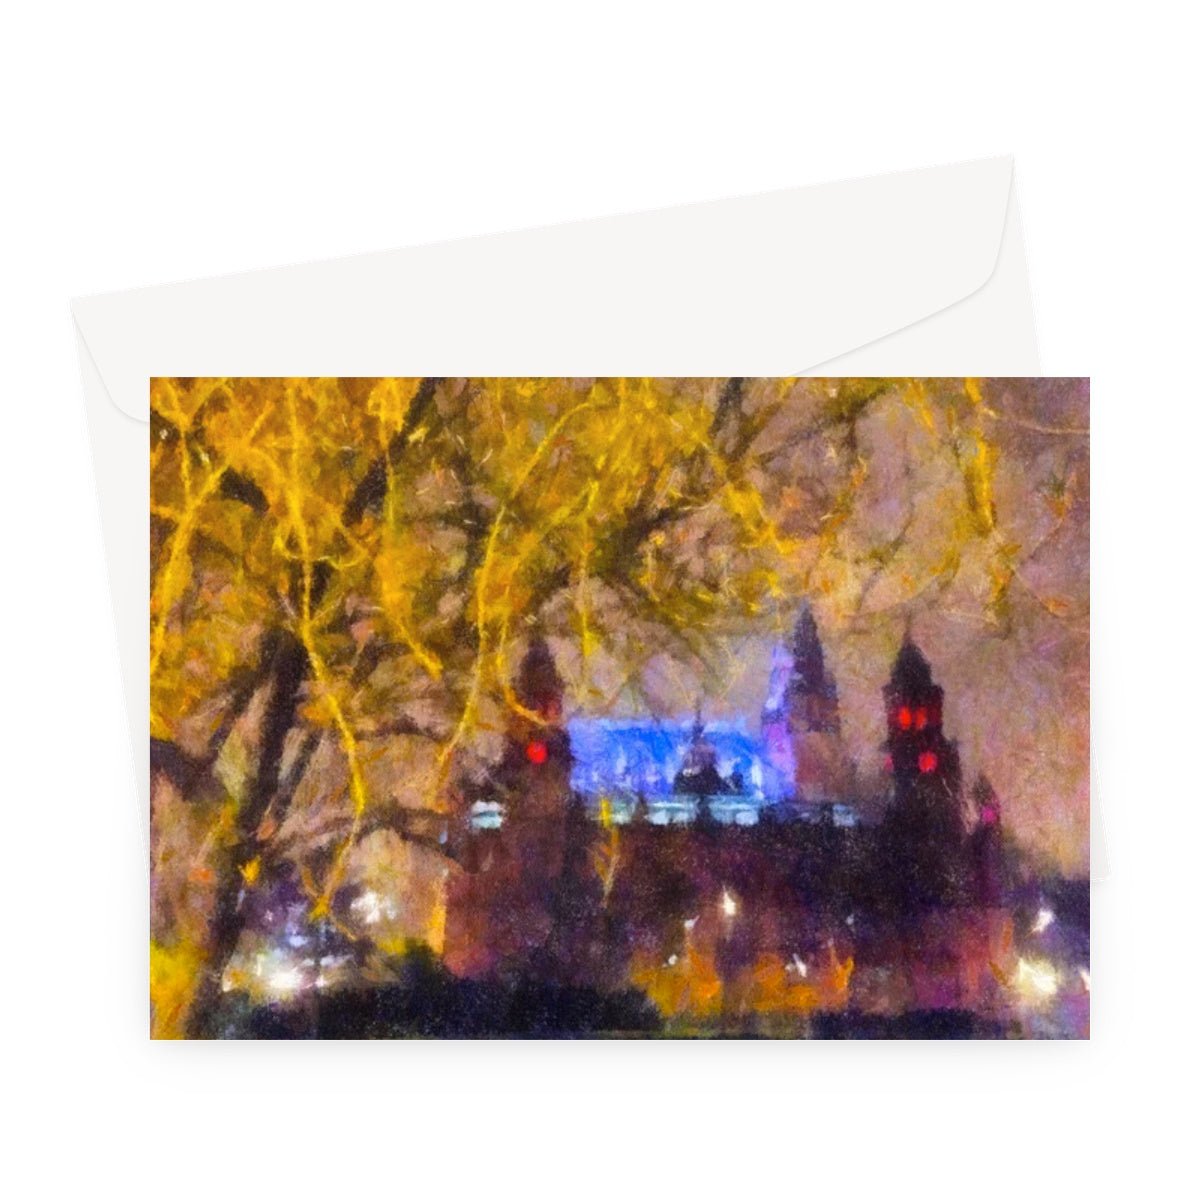 Kelvingrove Nights Glasgow Art Gifts Greeting Card-Greetings Cards-Edinburgh & Glasgow Art Gallery-A5 Landscape-10 Cards-Paintings, Prints, Homeware, Art Gifts From Scotland By Scottish Artist Kevin Hunter